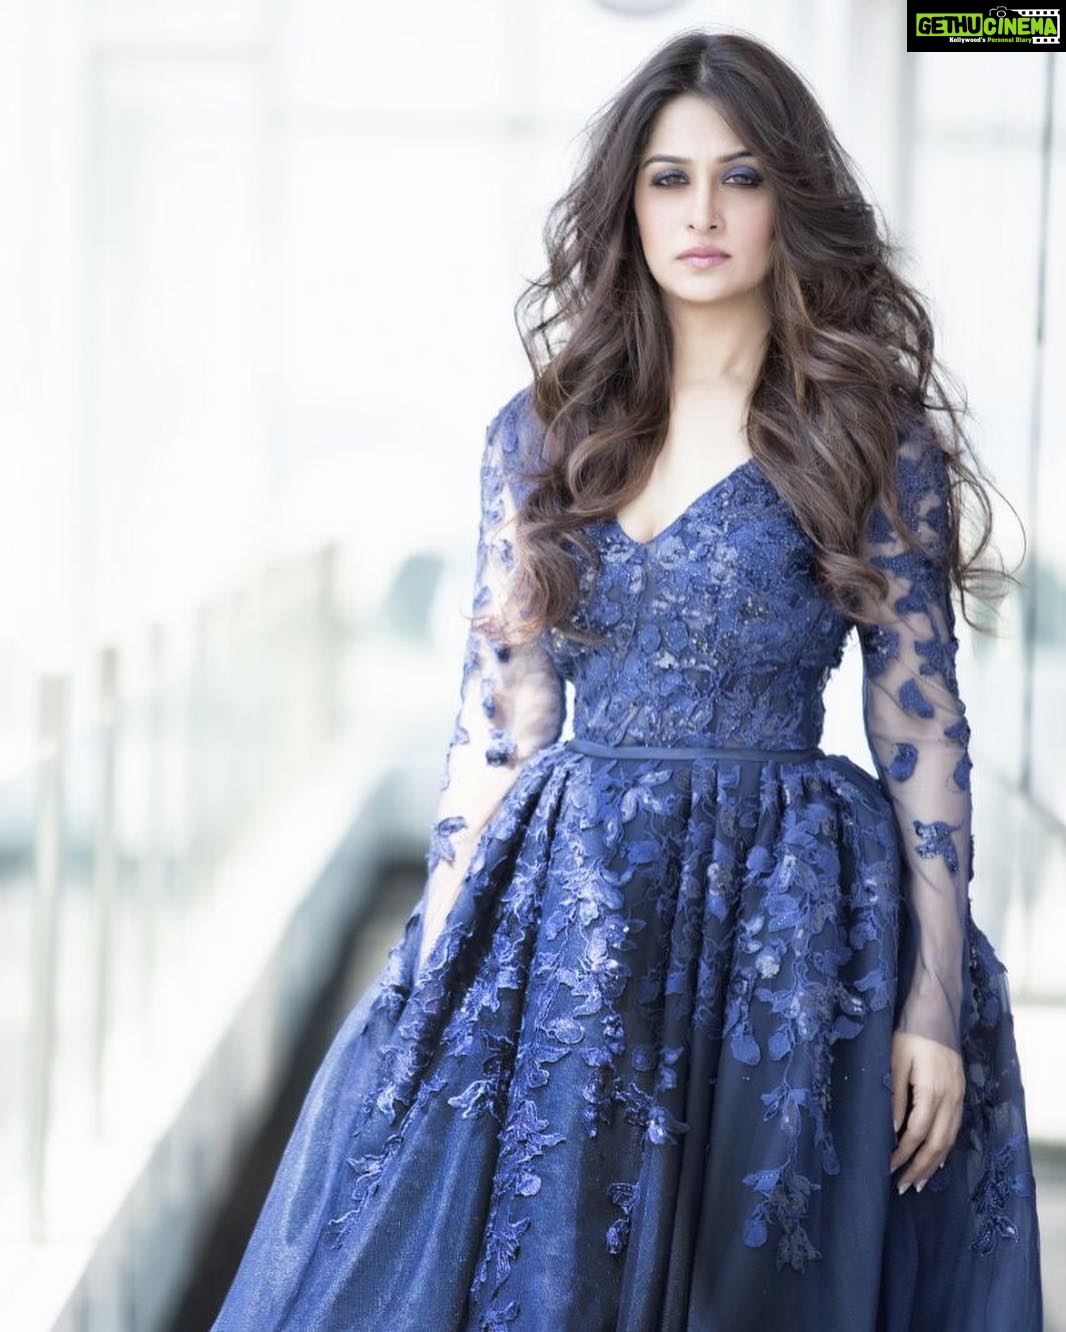 Dipika Kakar Instagram - A pop of colour never hurts, especially when that colour is #Blue! #FashionQuotes #photoshoot